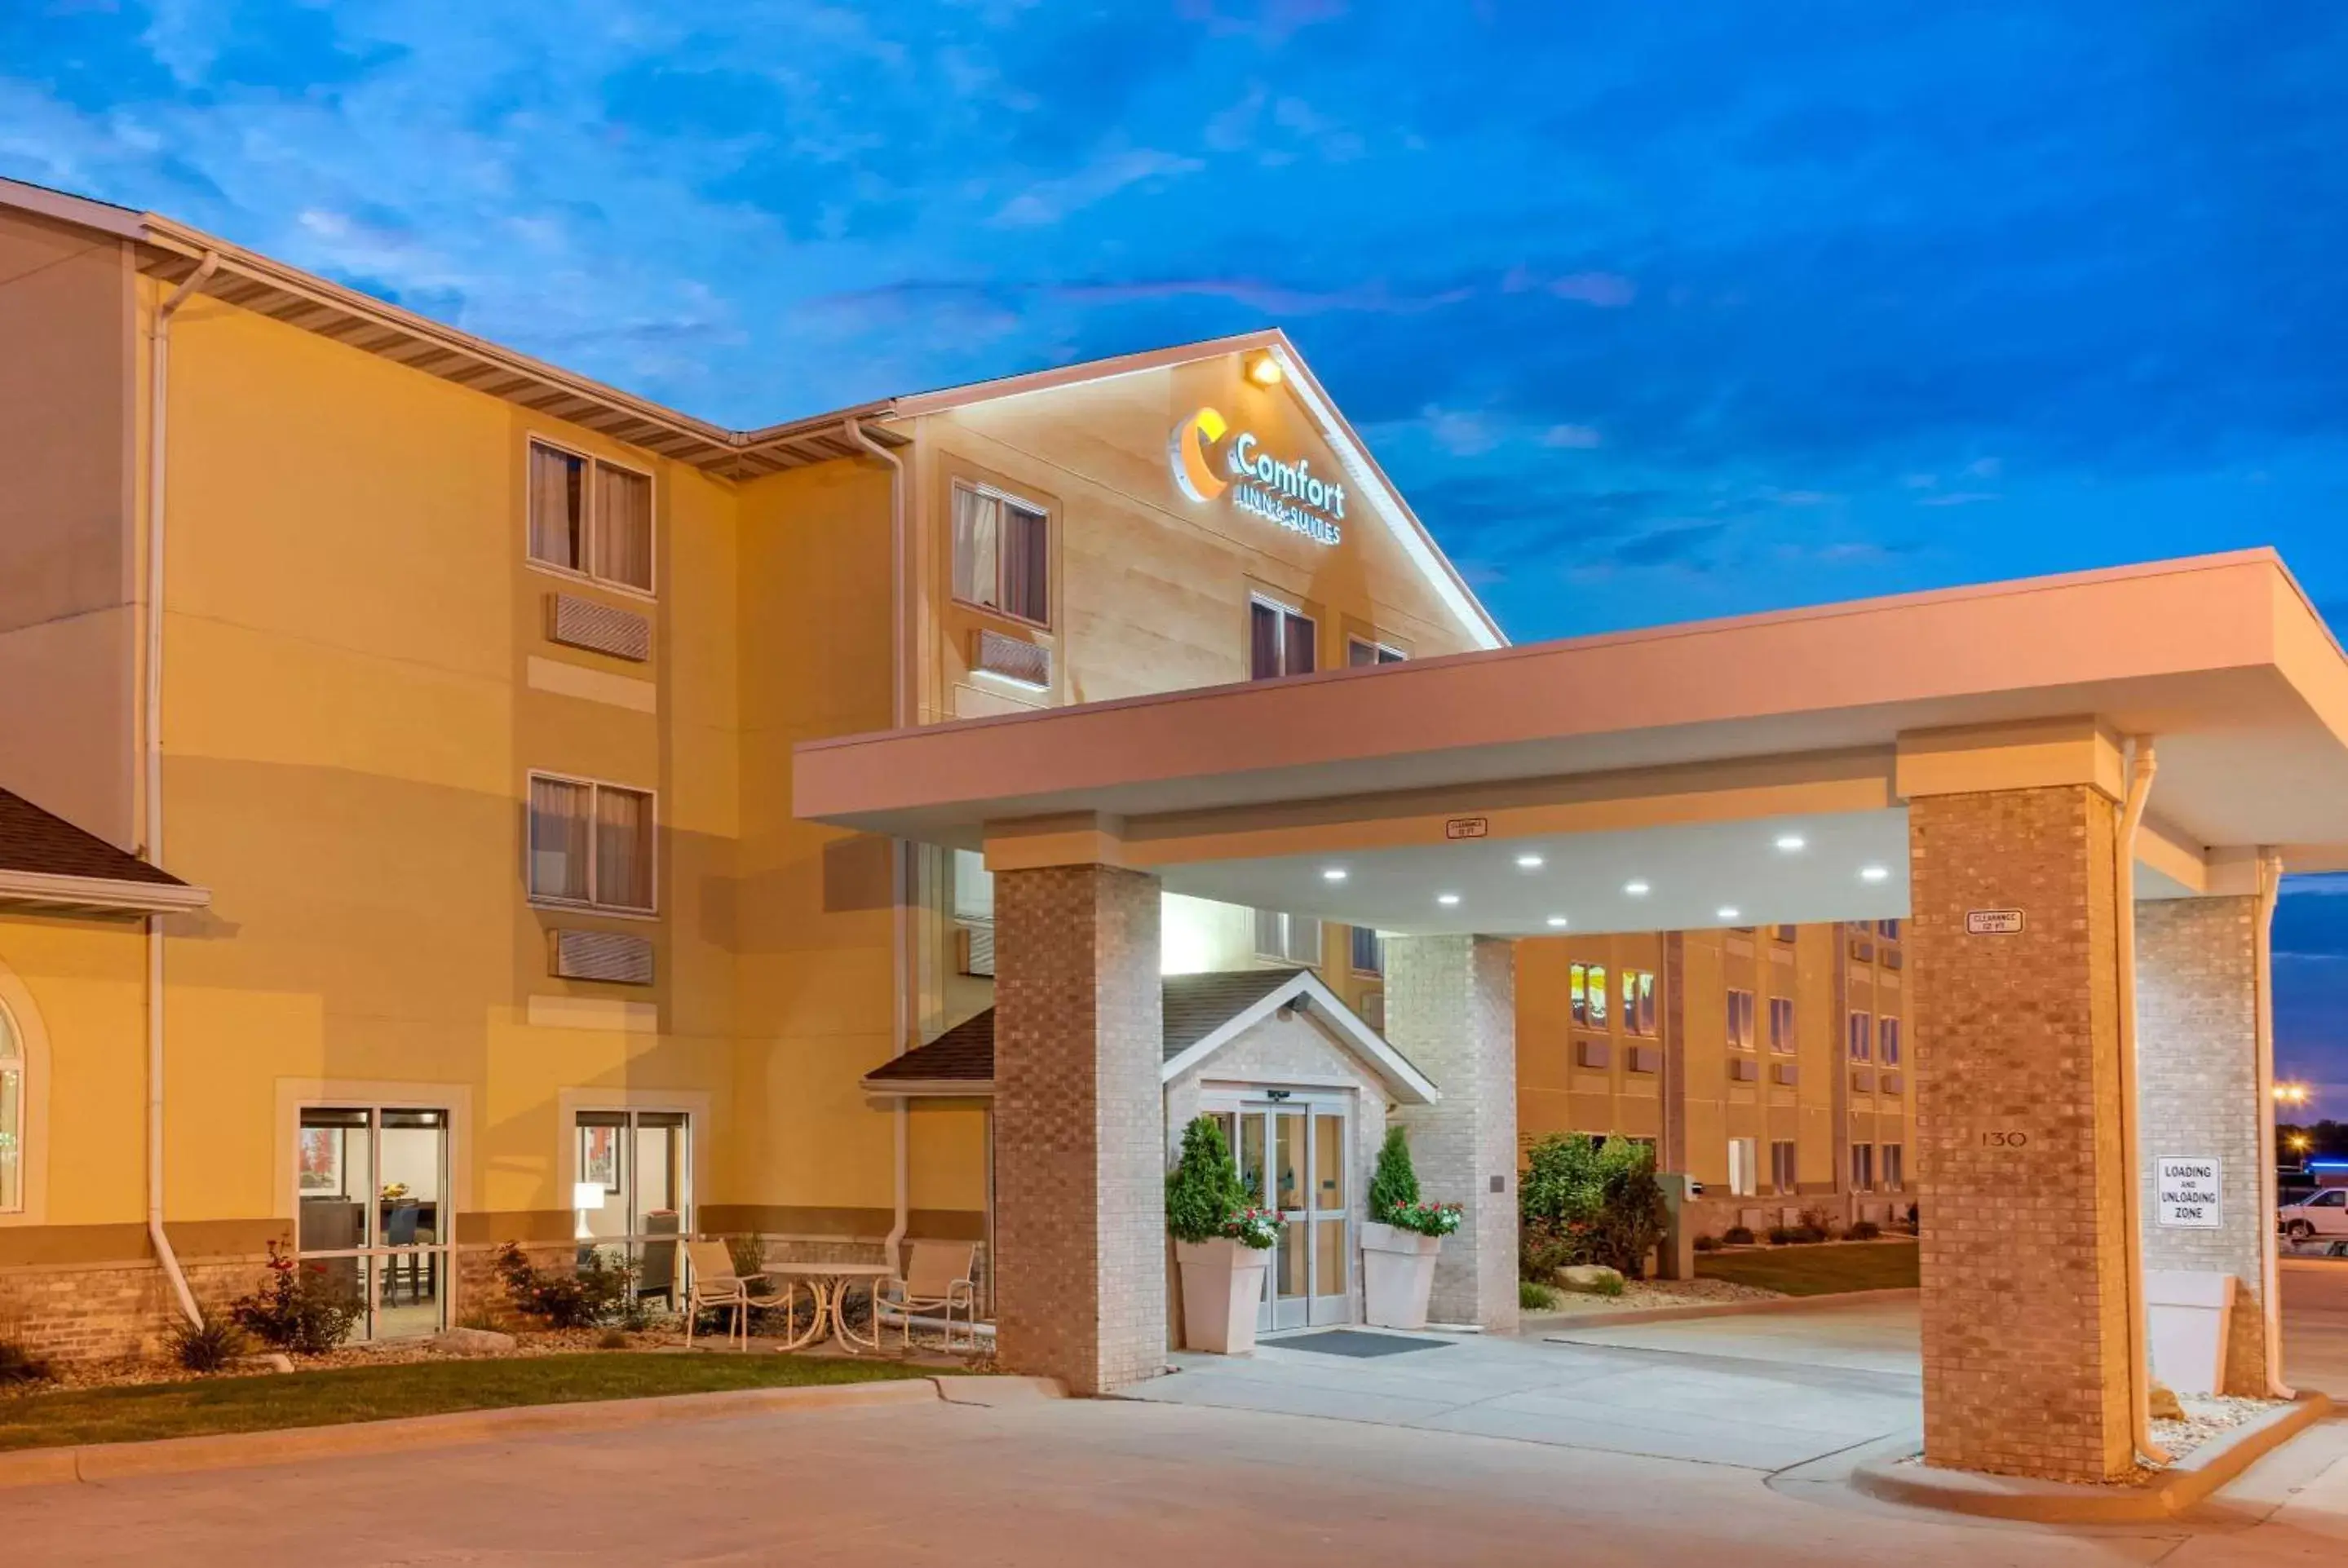 Other, Property Building in Comfort Inn & Suites near Route 66 Award Winning Gold Hotel 2021